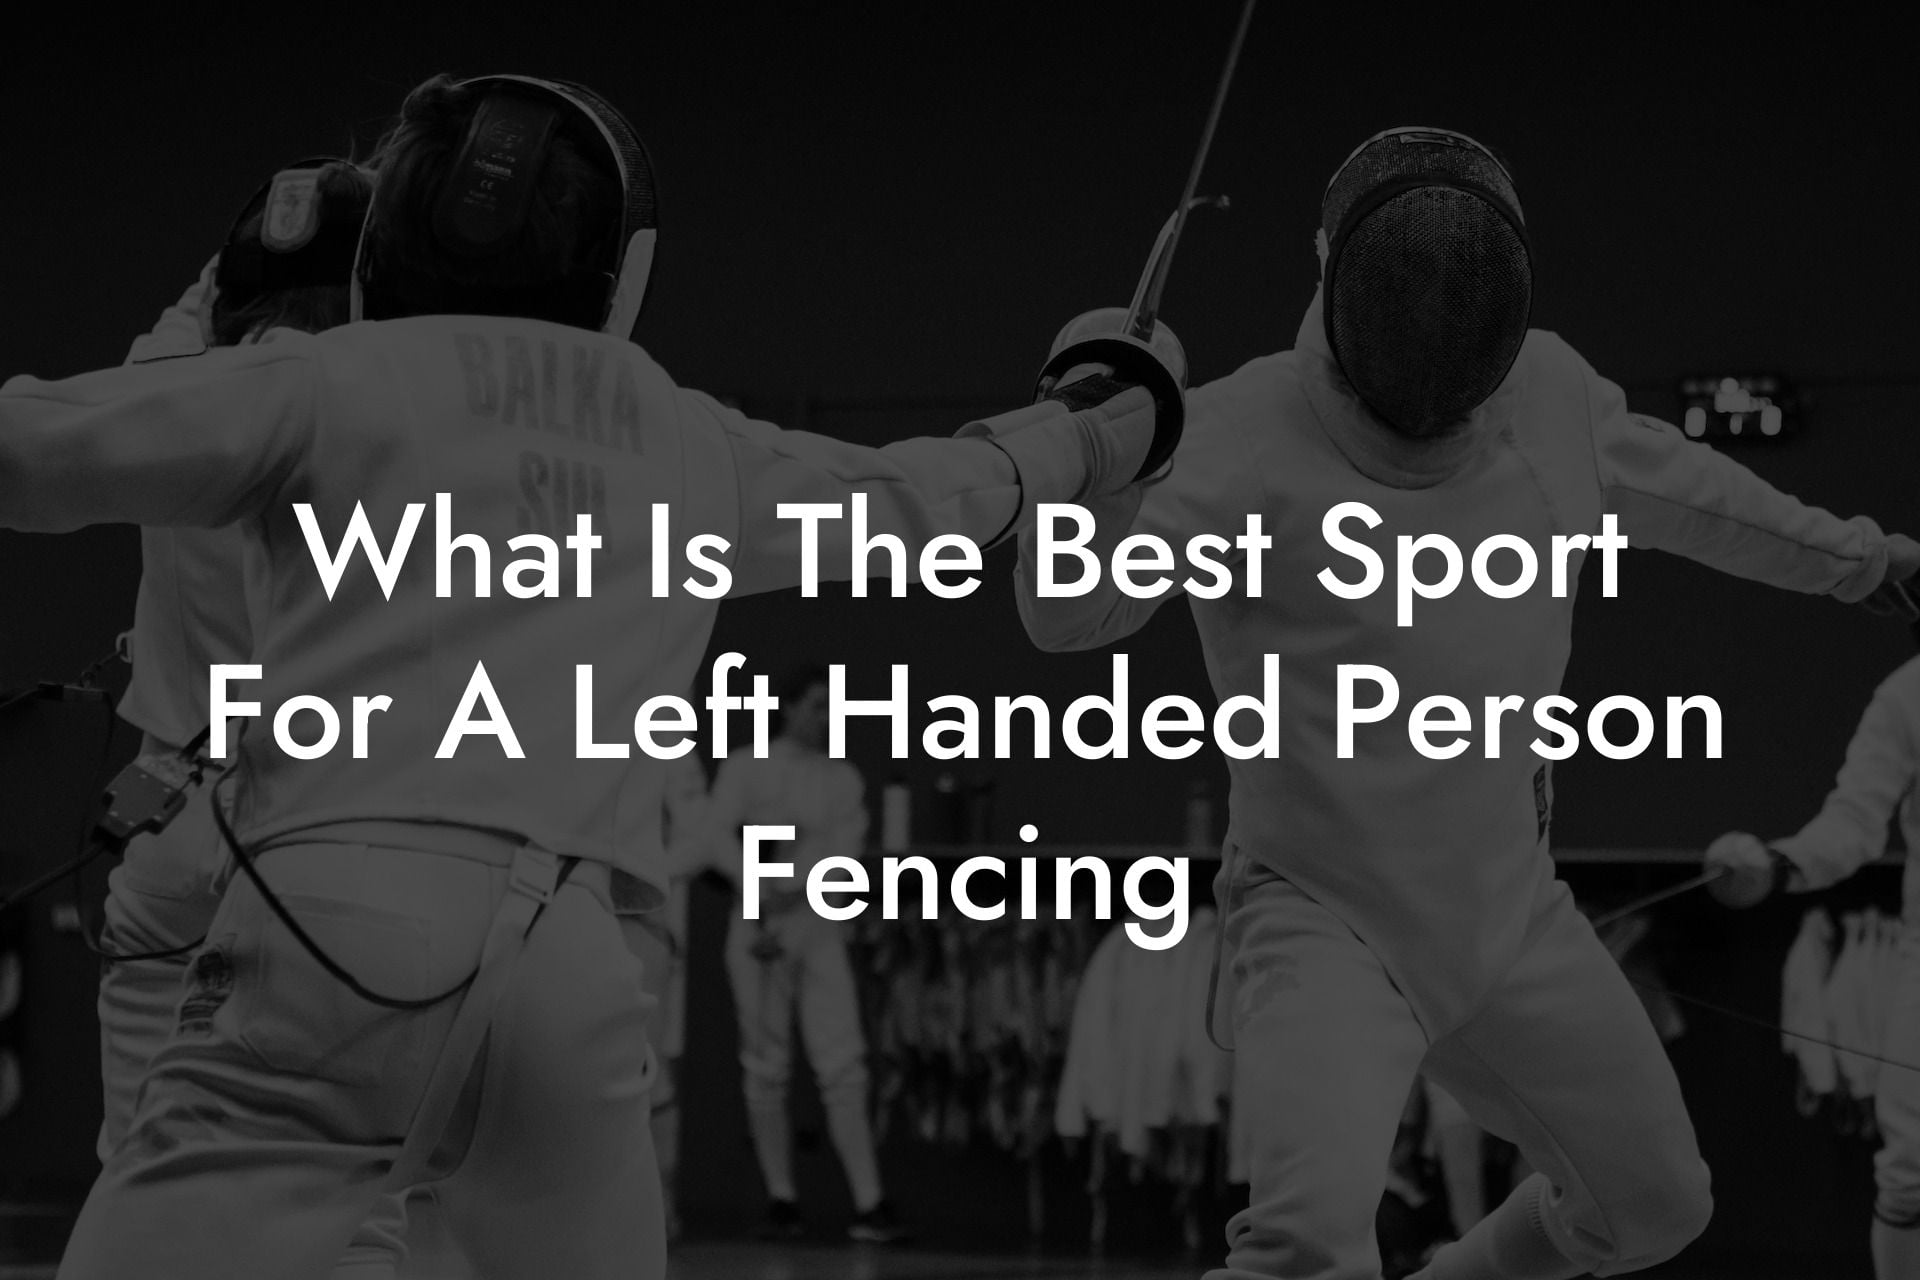 What Is The Best Sport For A Left Handed Person Fencing